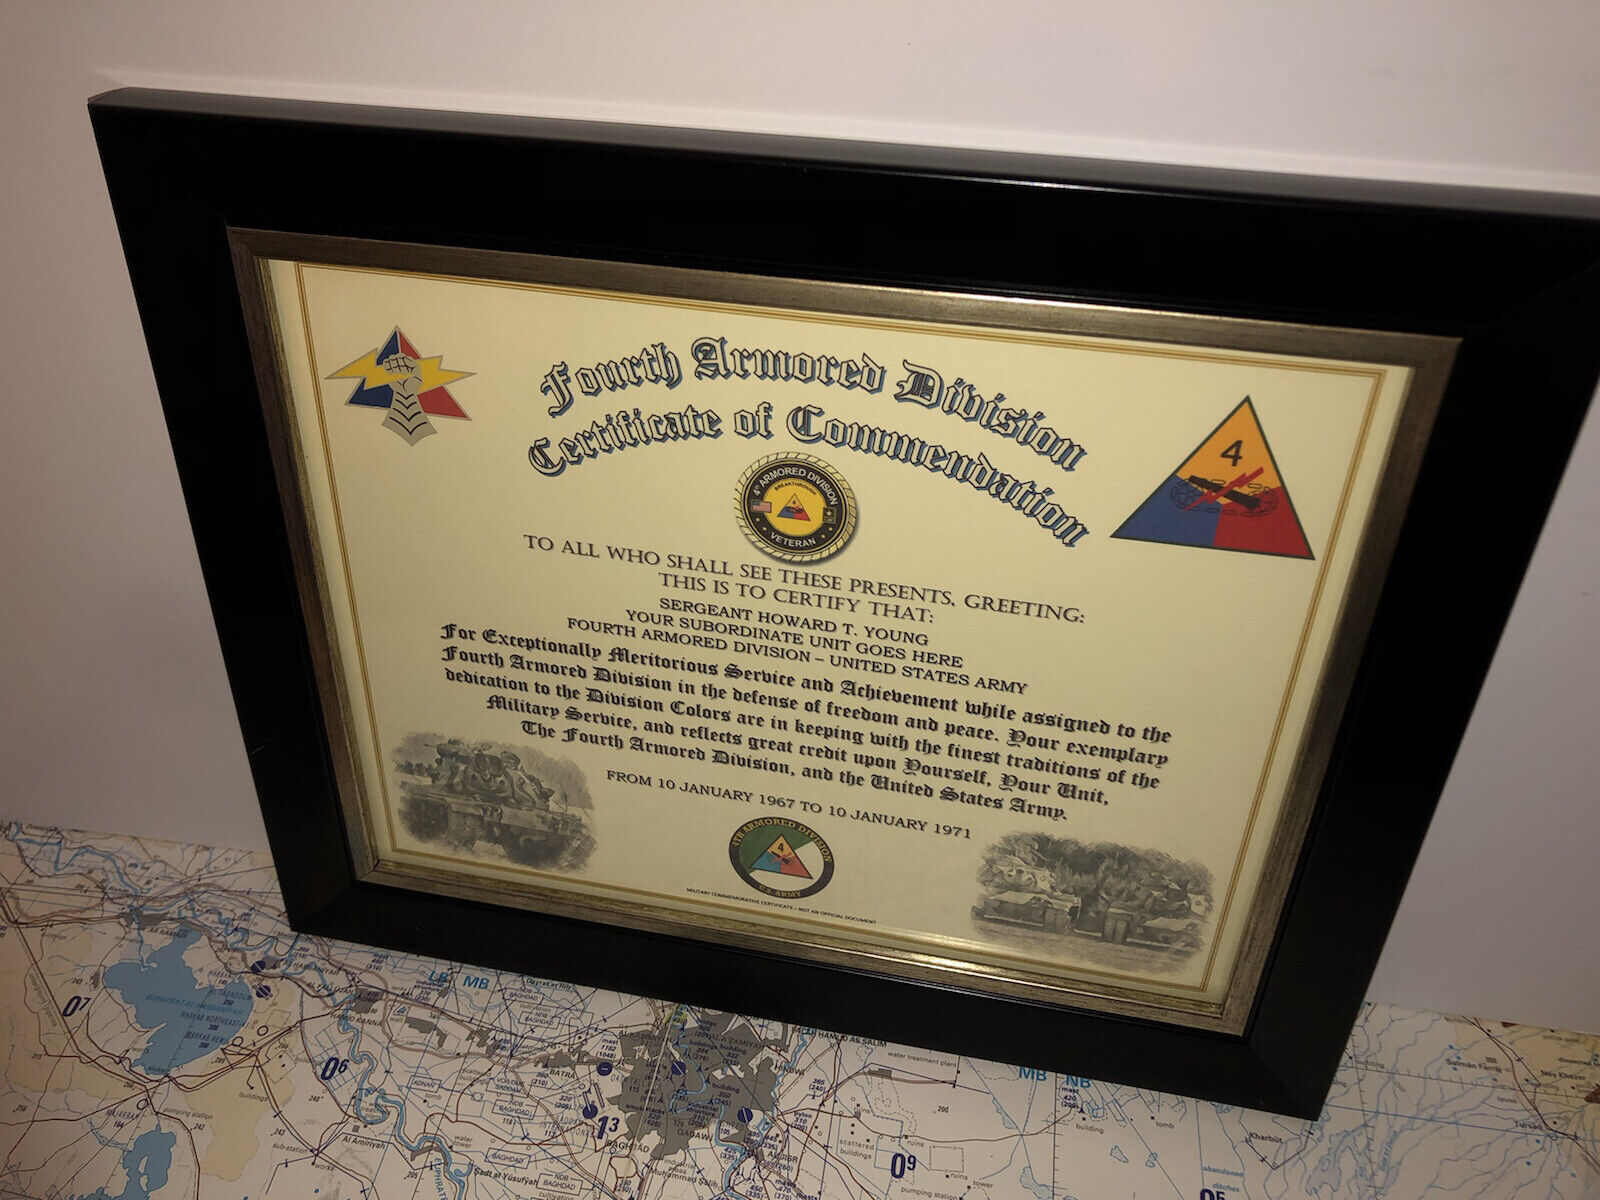 4TH ARMORED DIVISION / COMMEMORATIVE - CERTIFICATE OF COMMENDATION